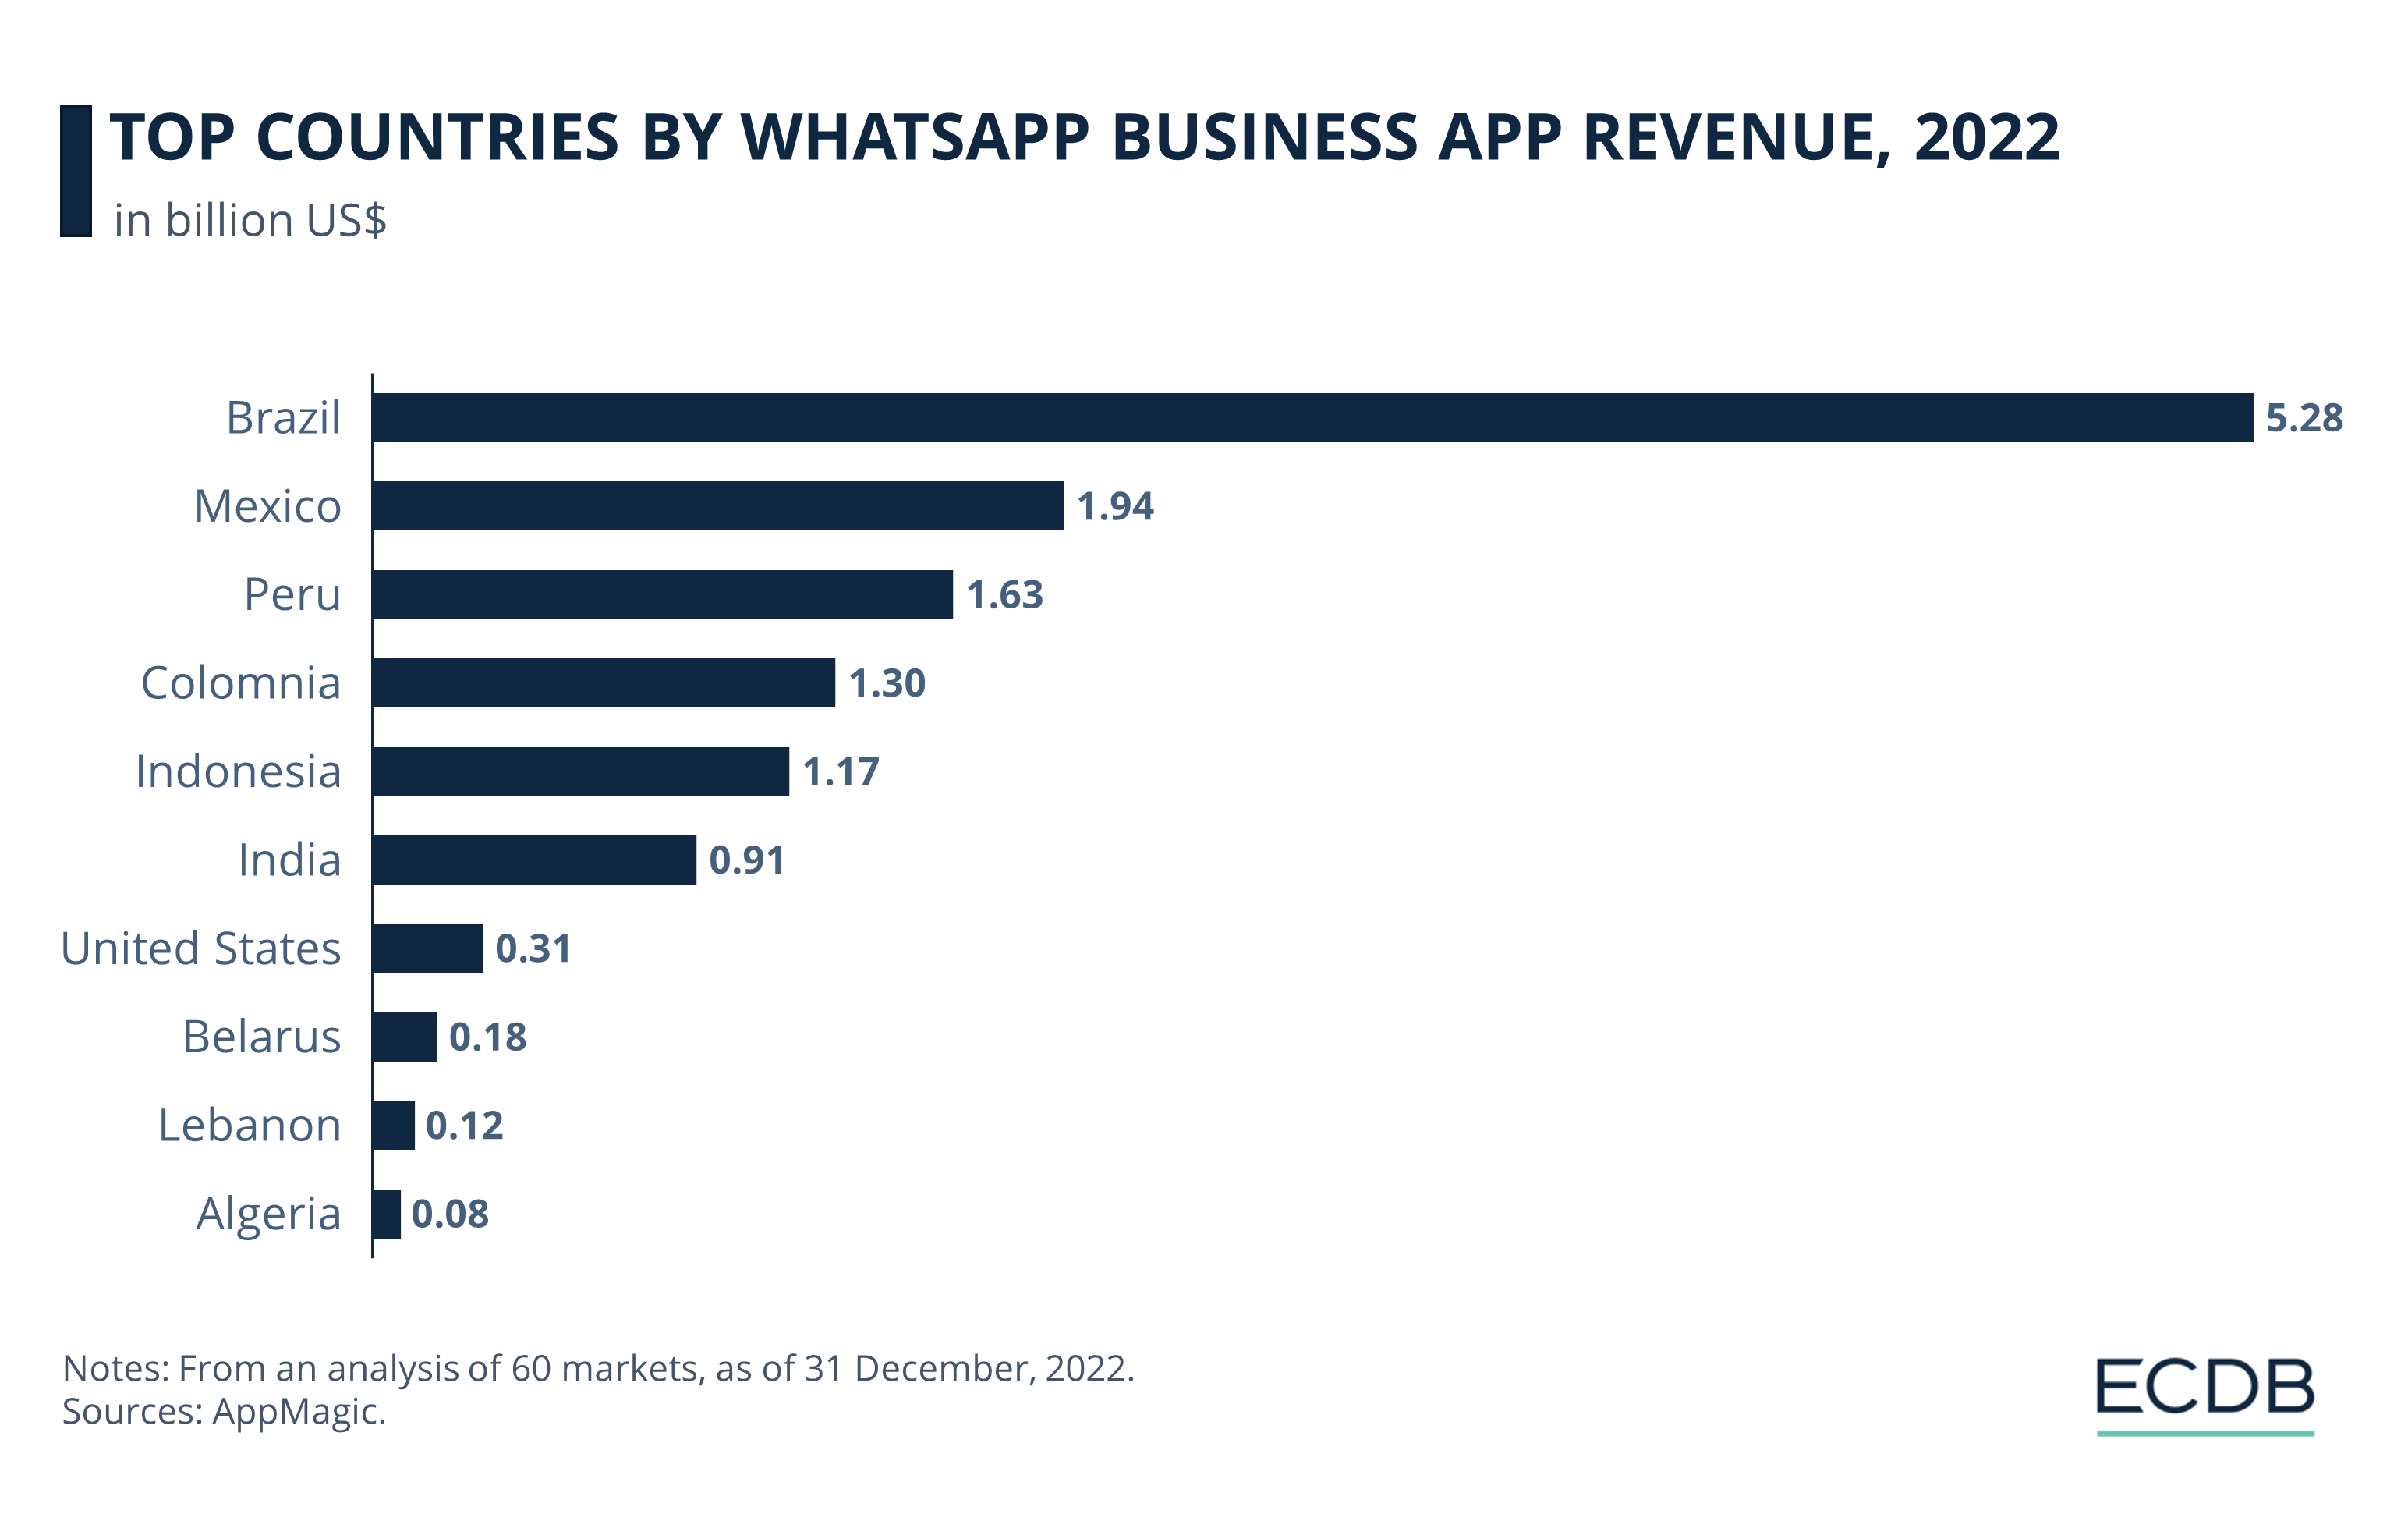 Top Countries by WhatsApp Business App Revenue, 2022